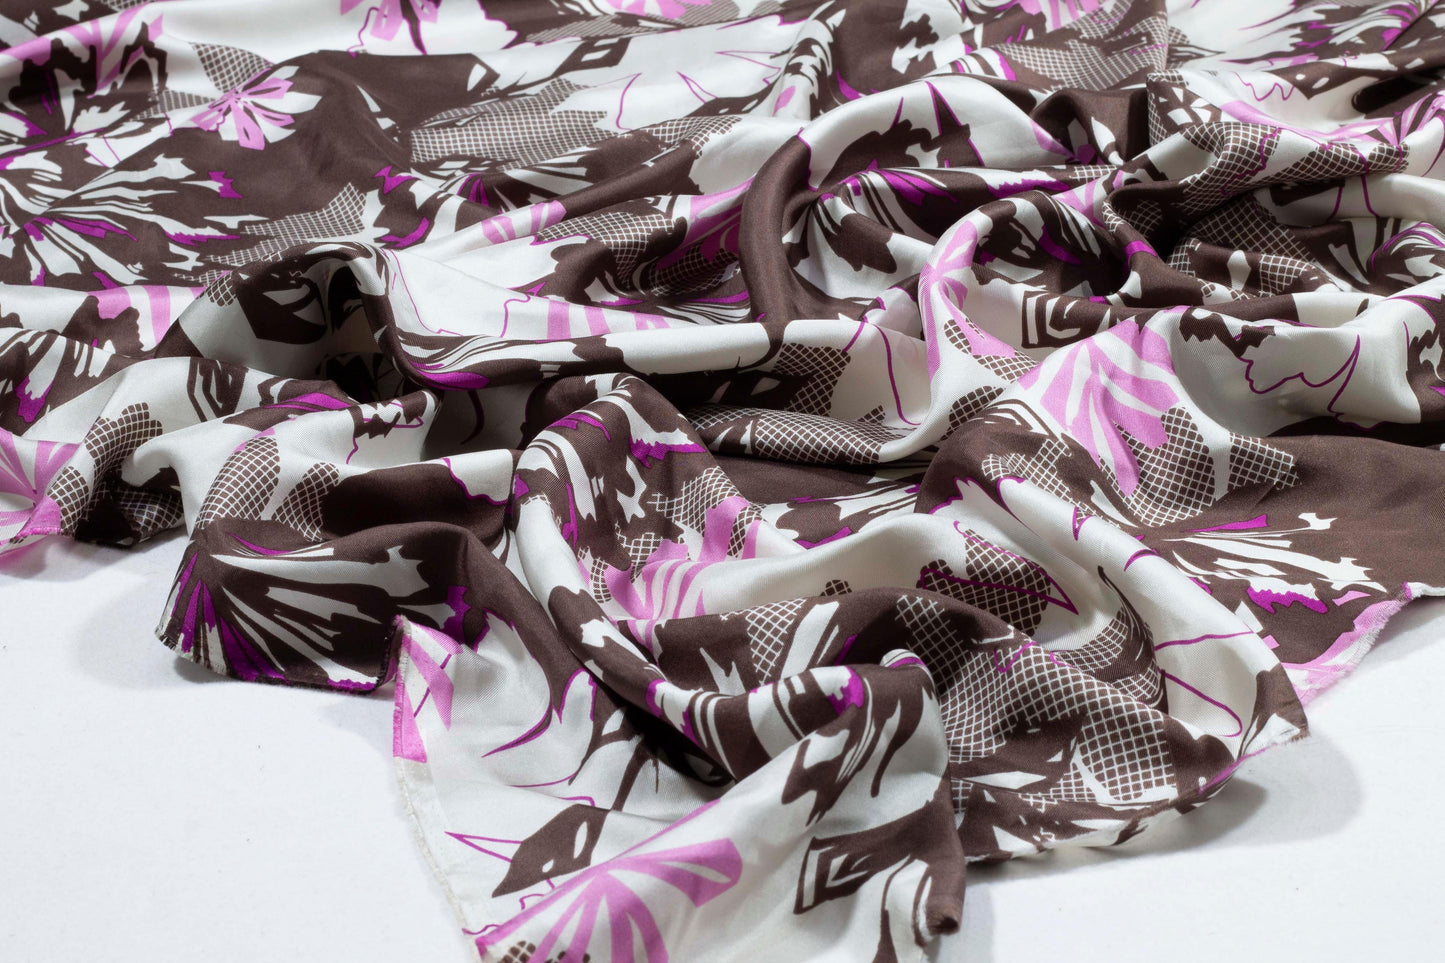 Floral Silk Charmeuse - Brown, Pink, White - Prime Fabrics